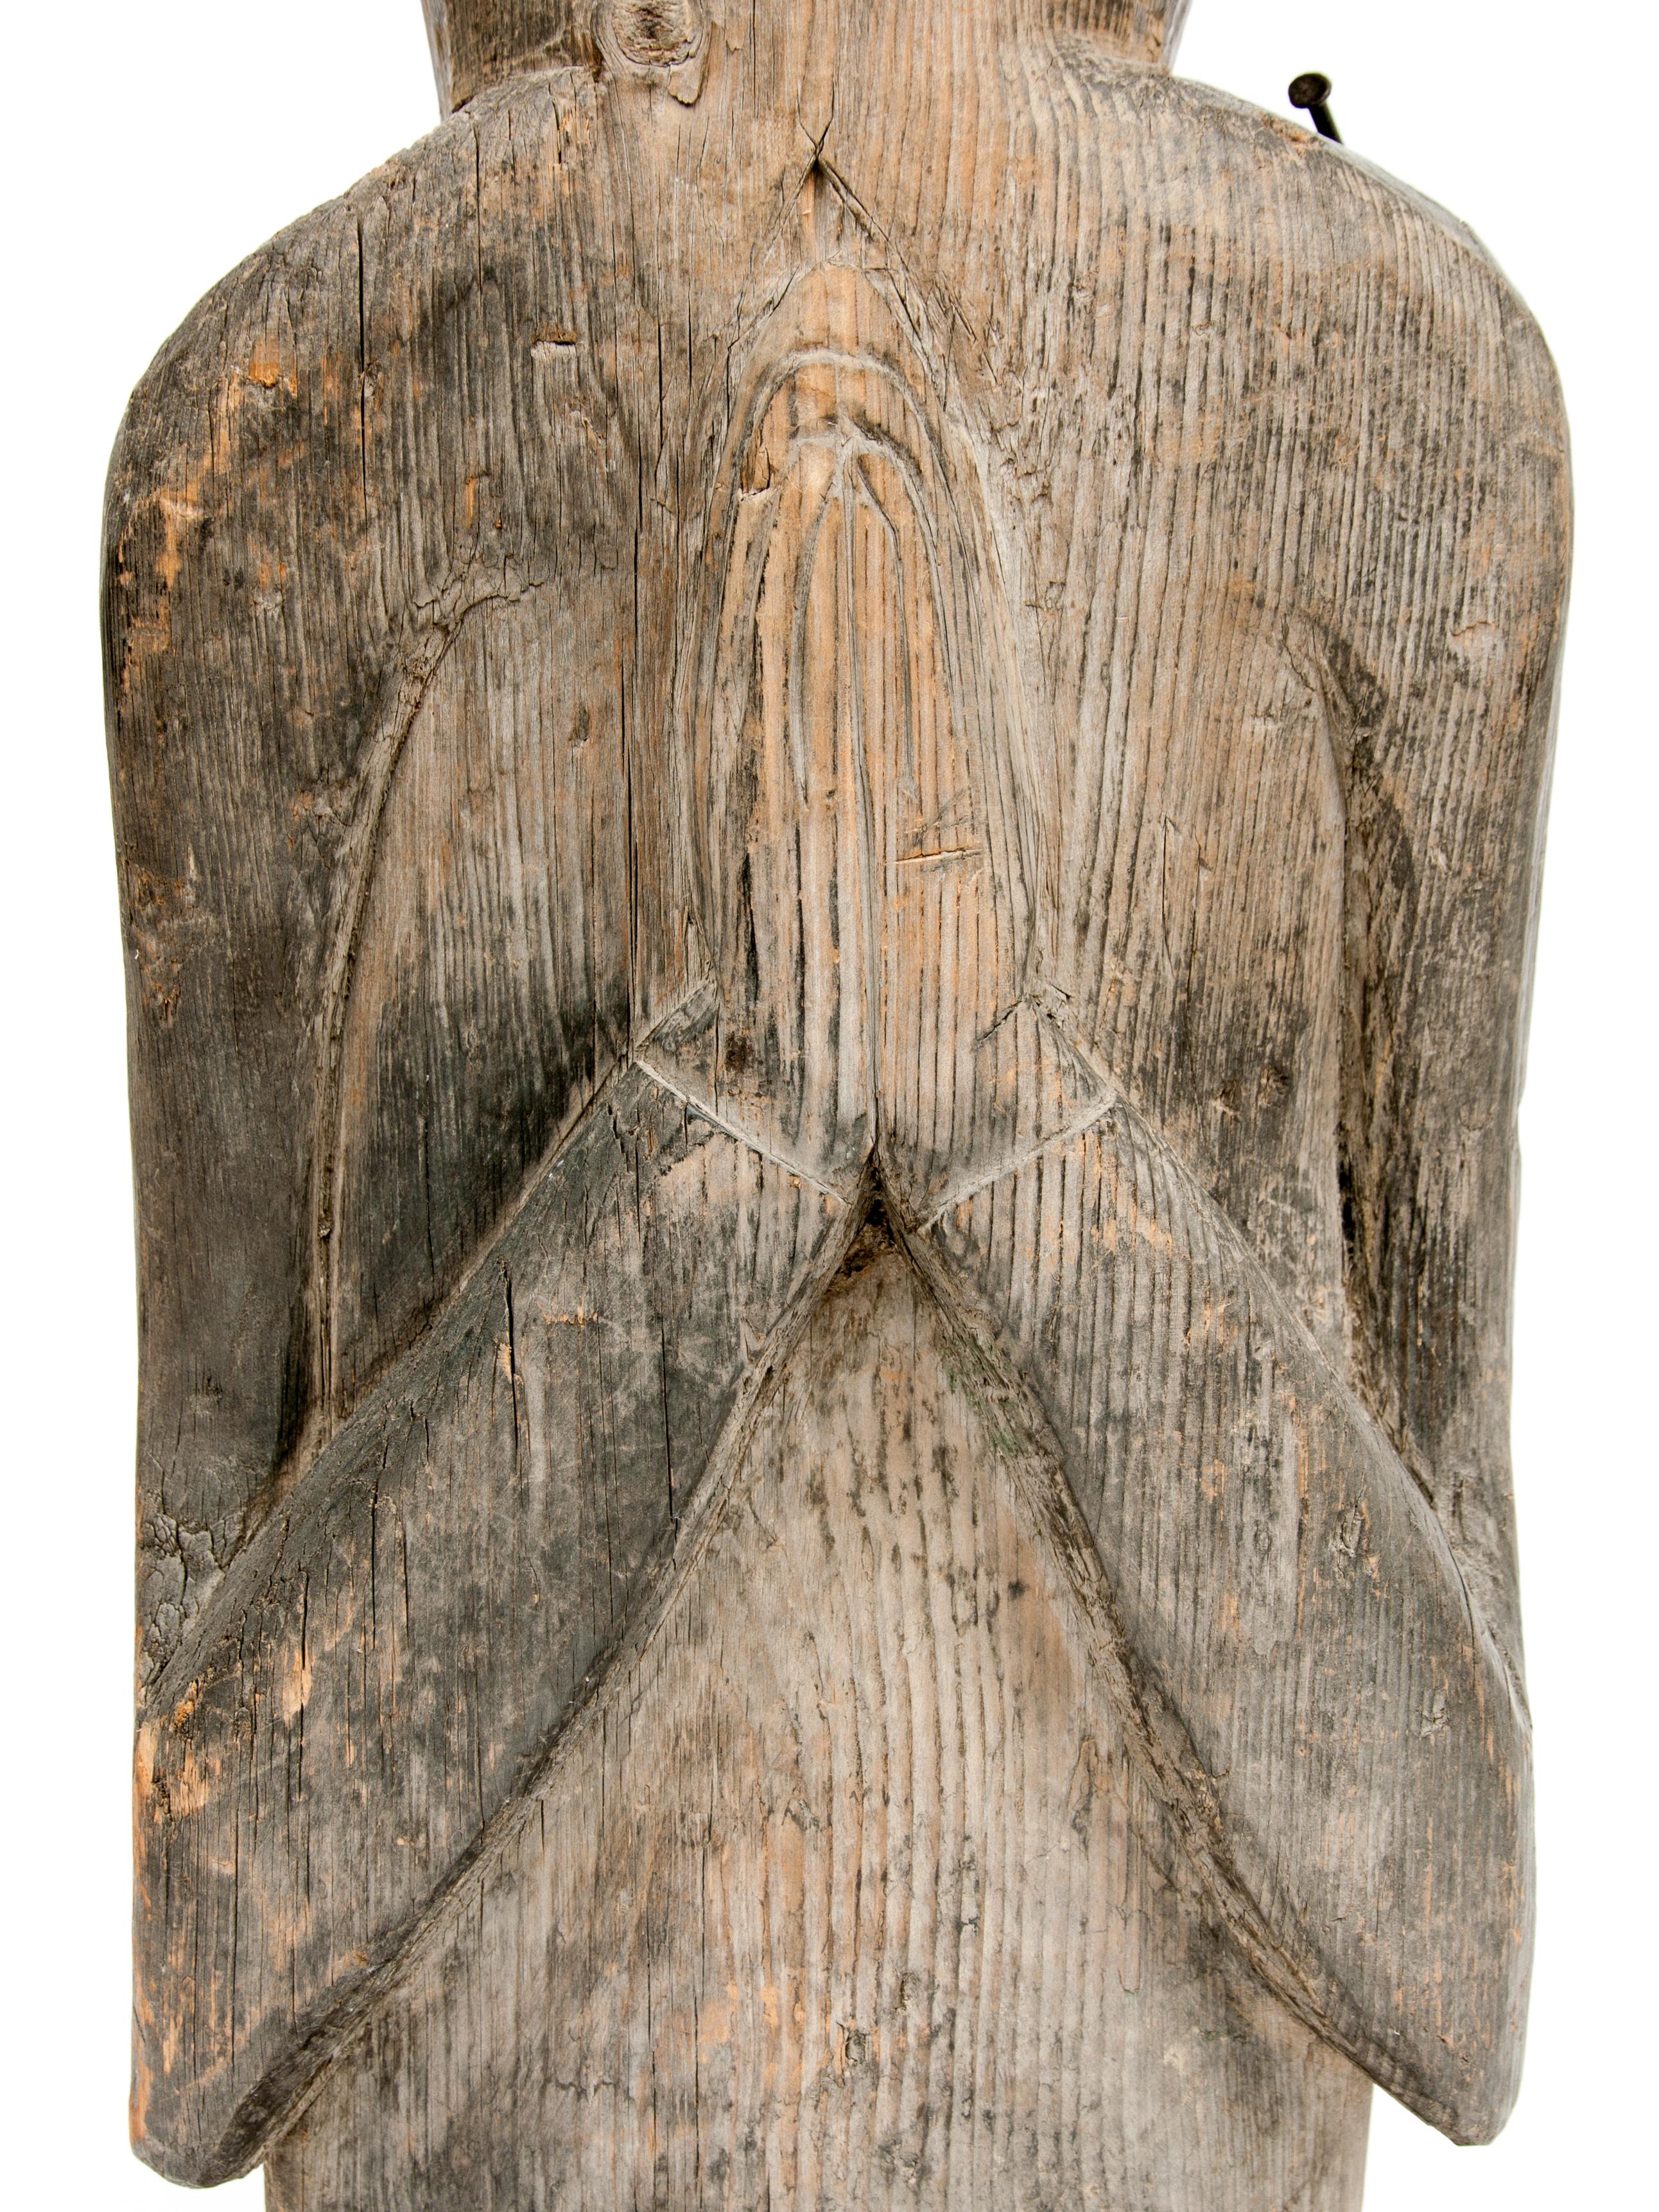 Paint Old Wooden Tribal Statue from West Nepal, Mid-20th Century, Steel Plate Base